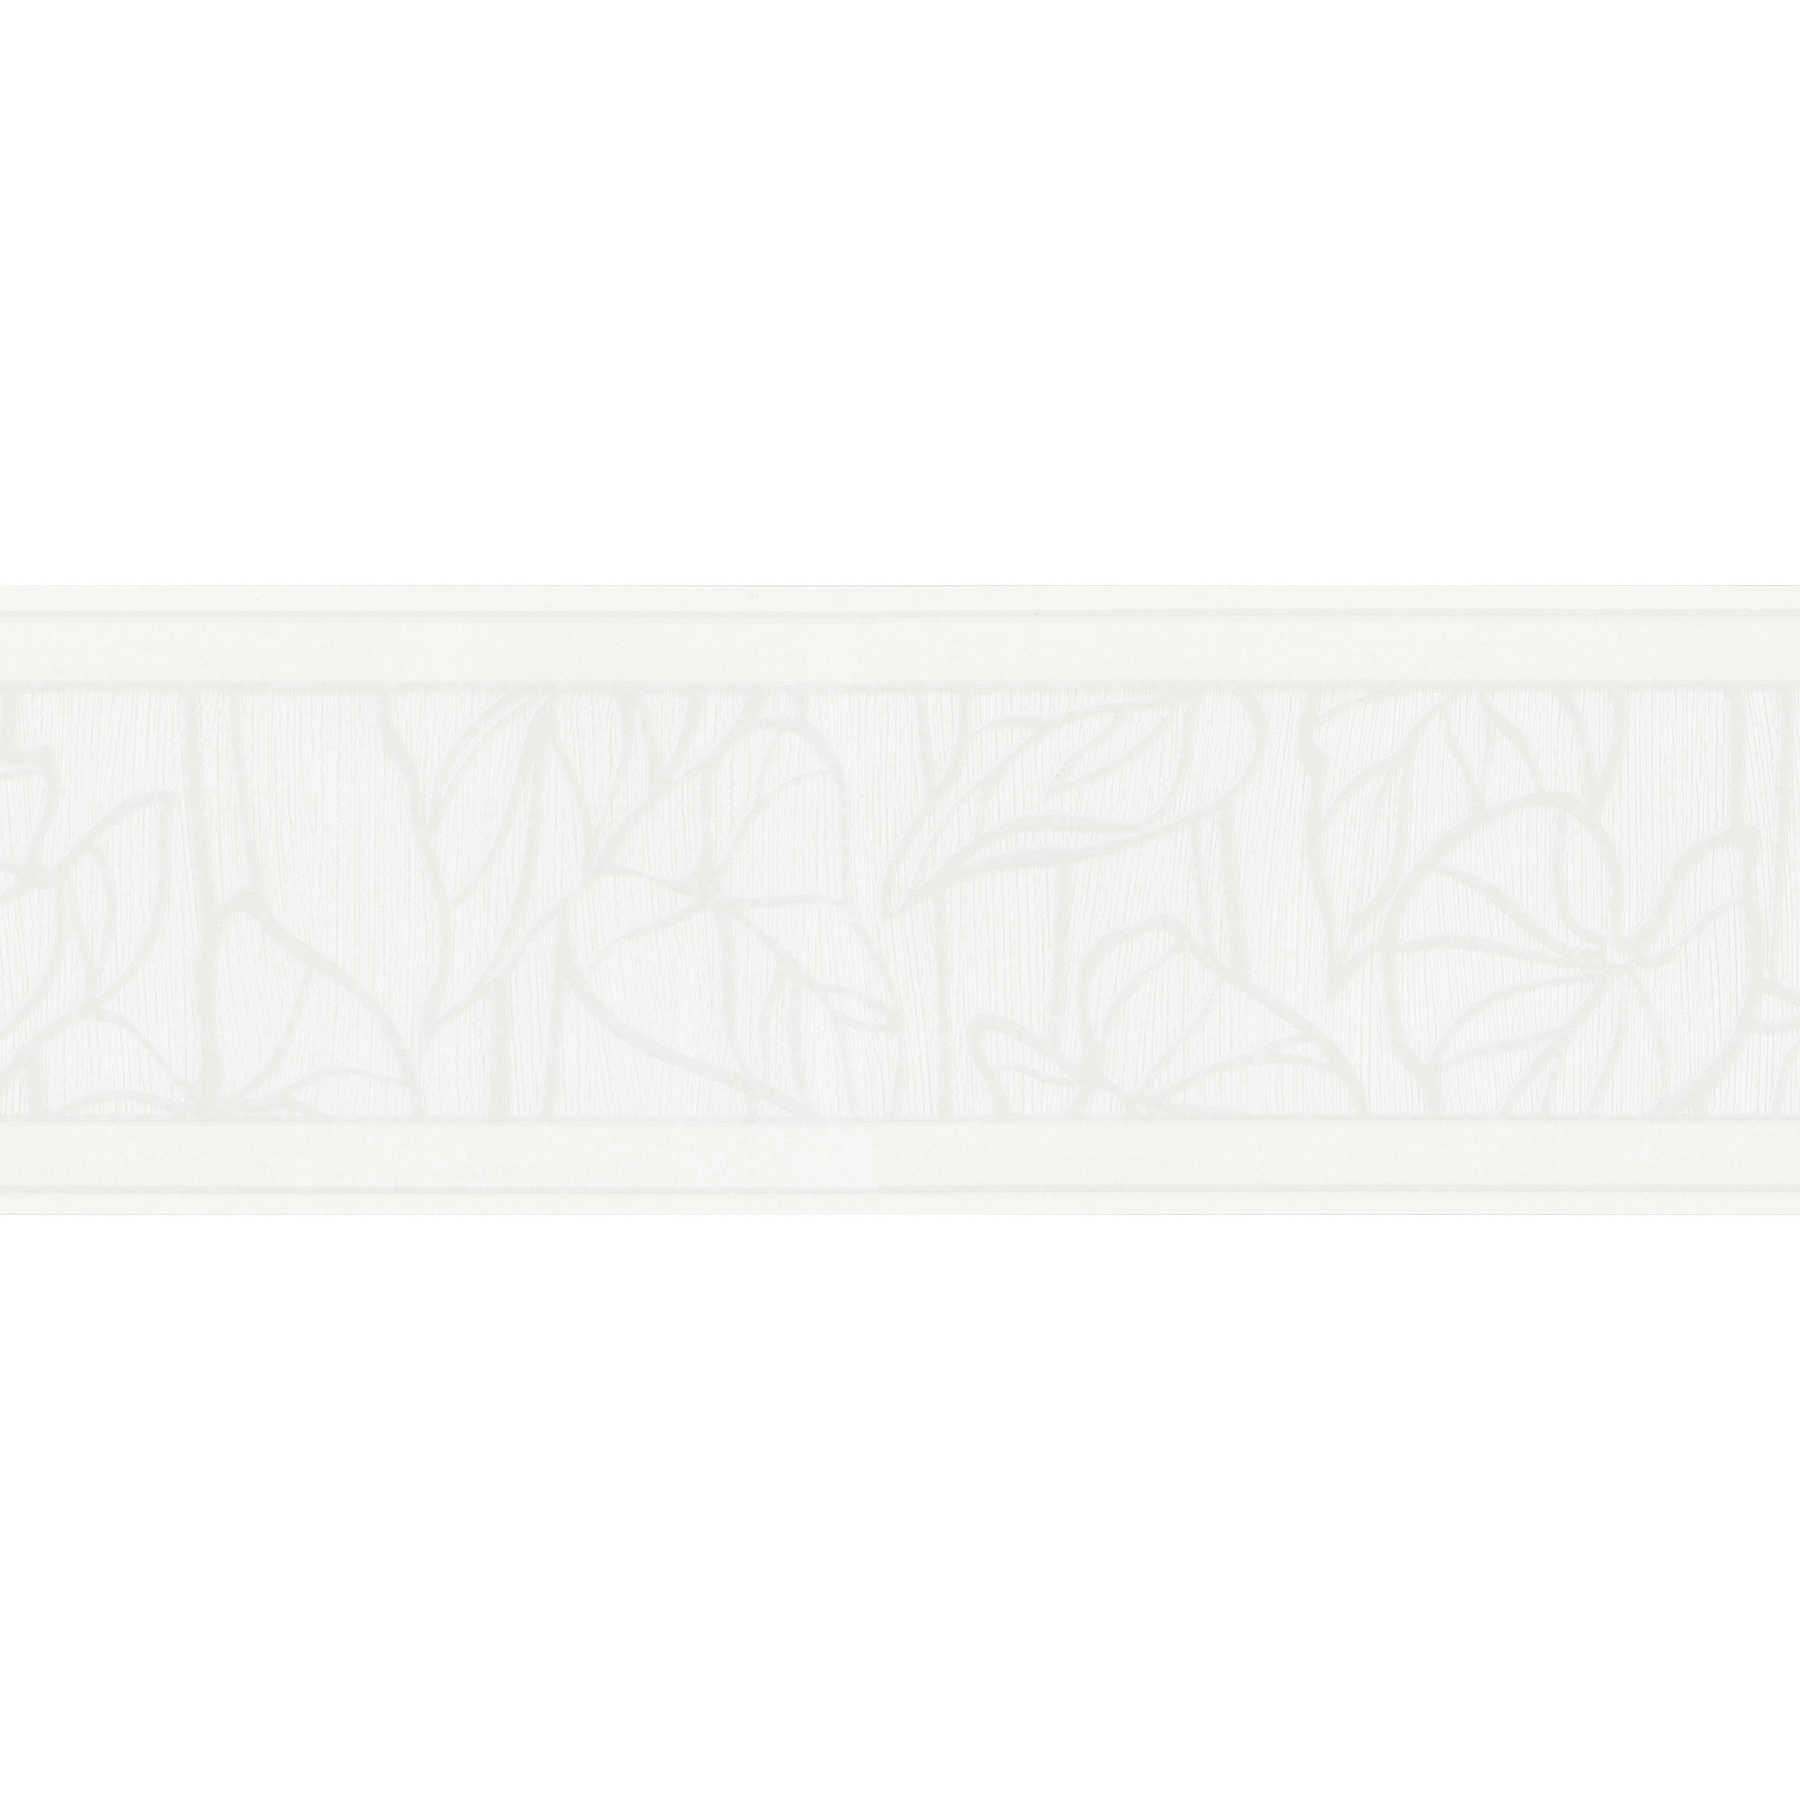         Cream white border with leaf motif and textured pattern - White
    